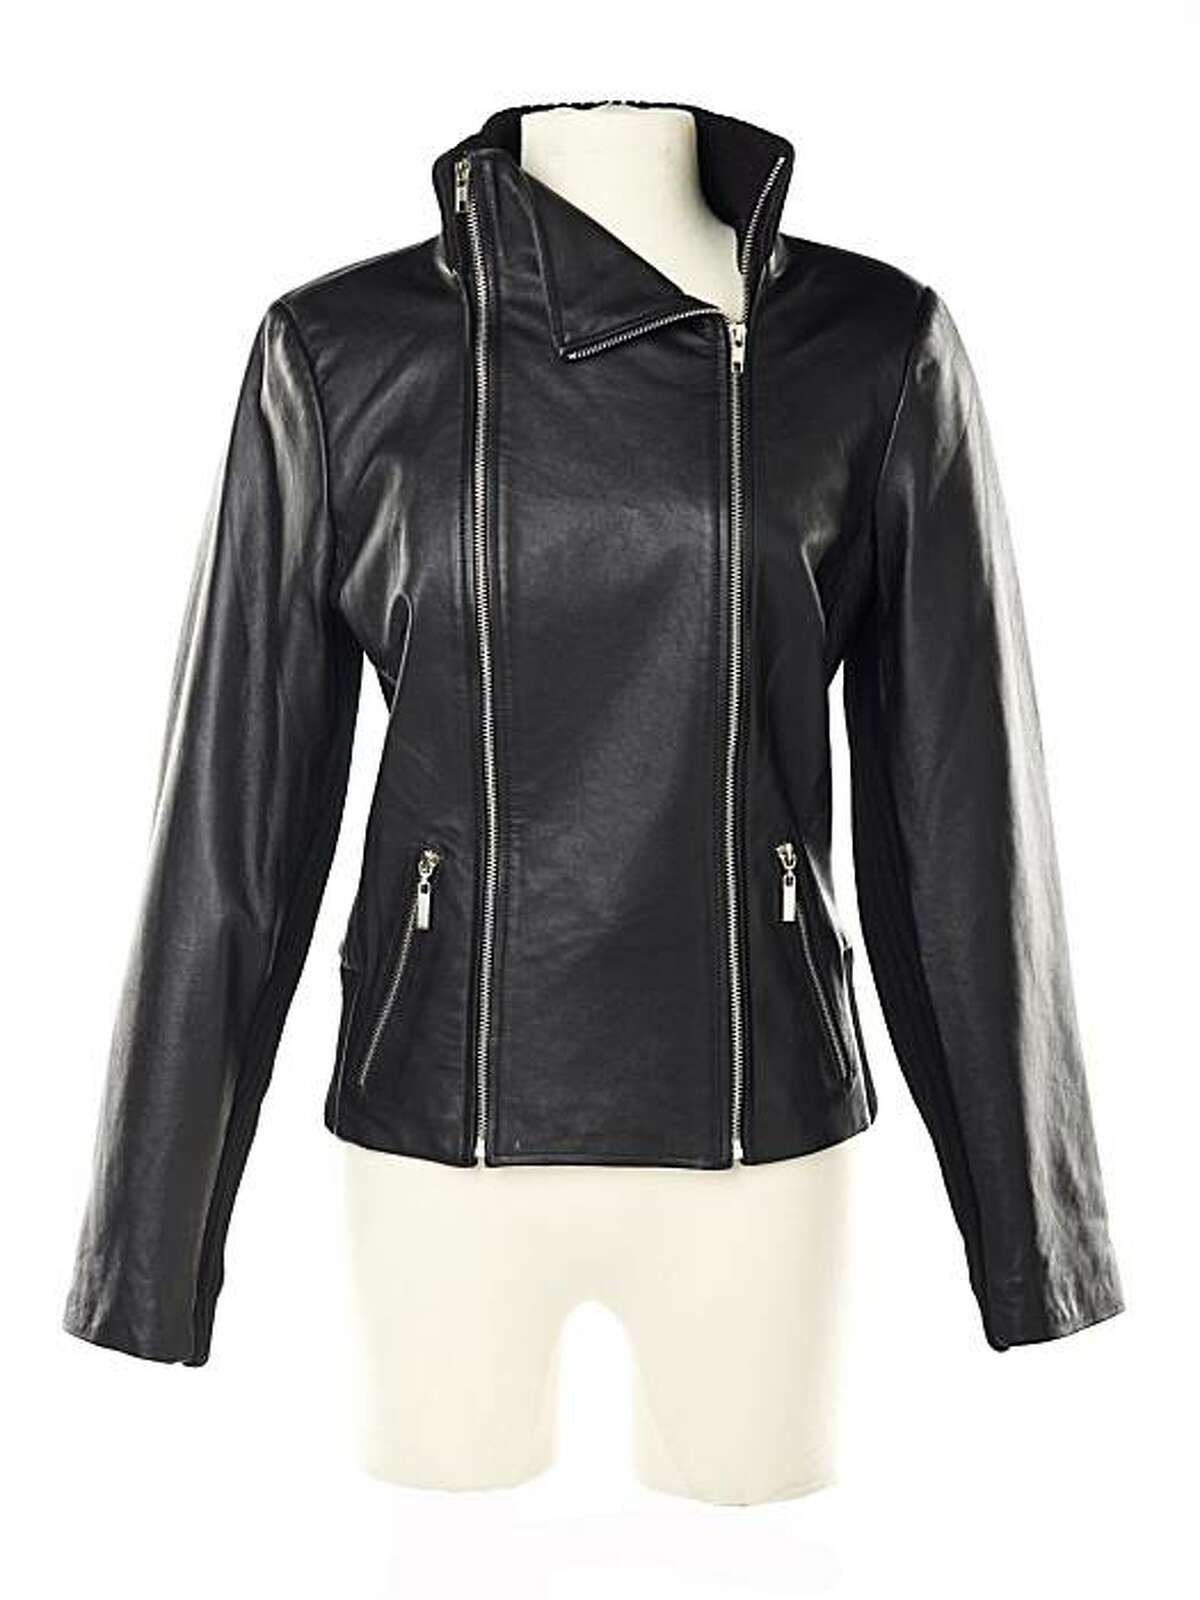 Rachel Zoe Lamb Leather Jacket with Knit Trim (approximately $179.75) on QVC.